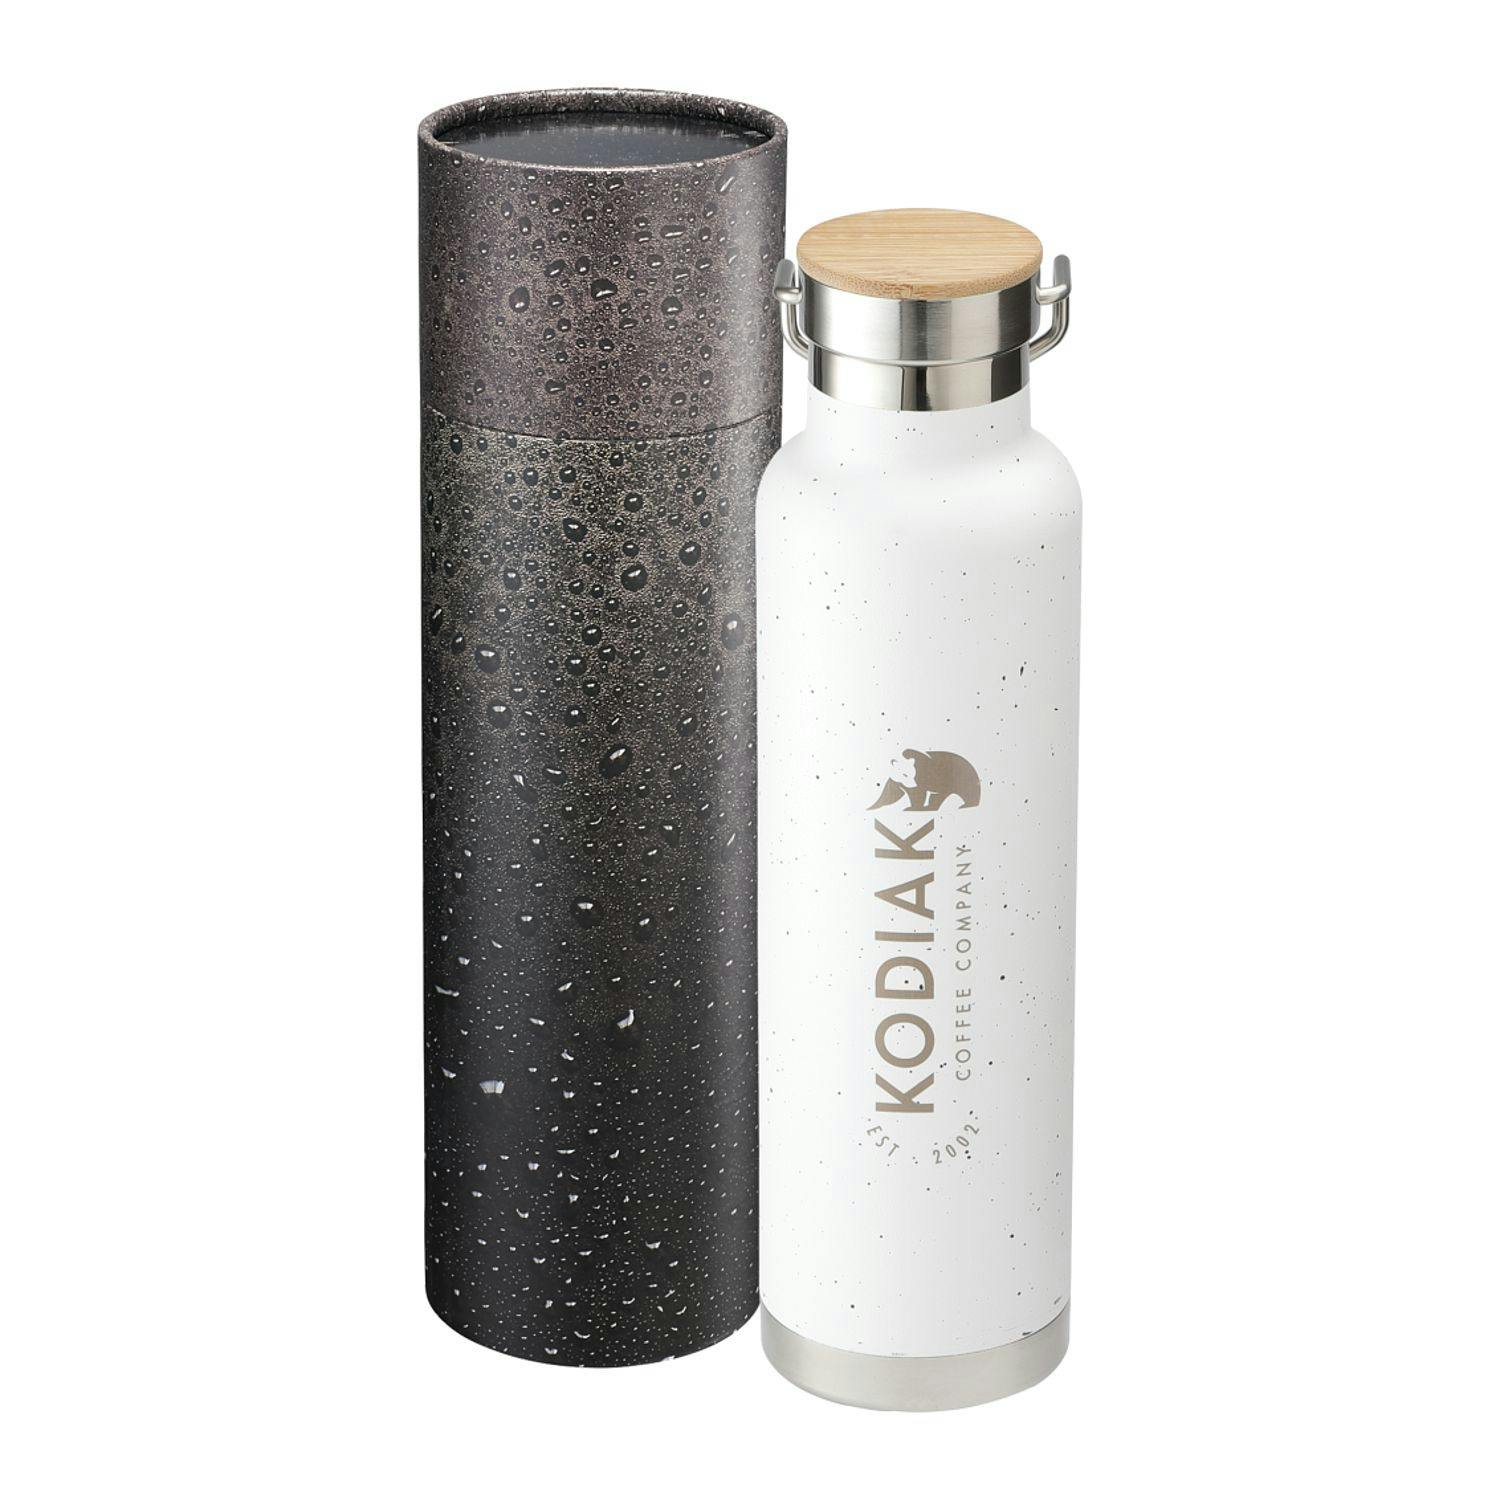 Speckled Thor Bottle 22oz With Cylindrical Box - additional Image 2